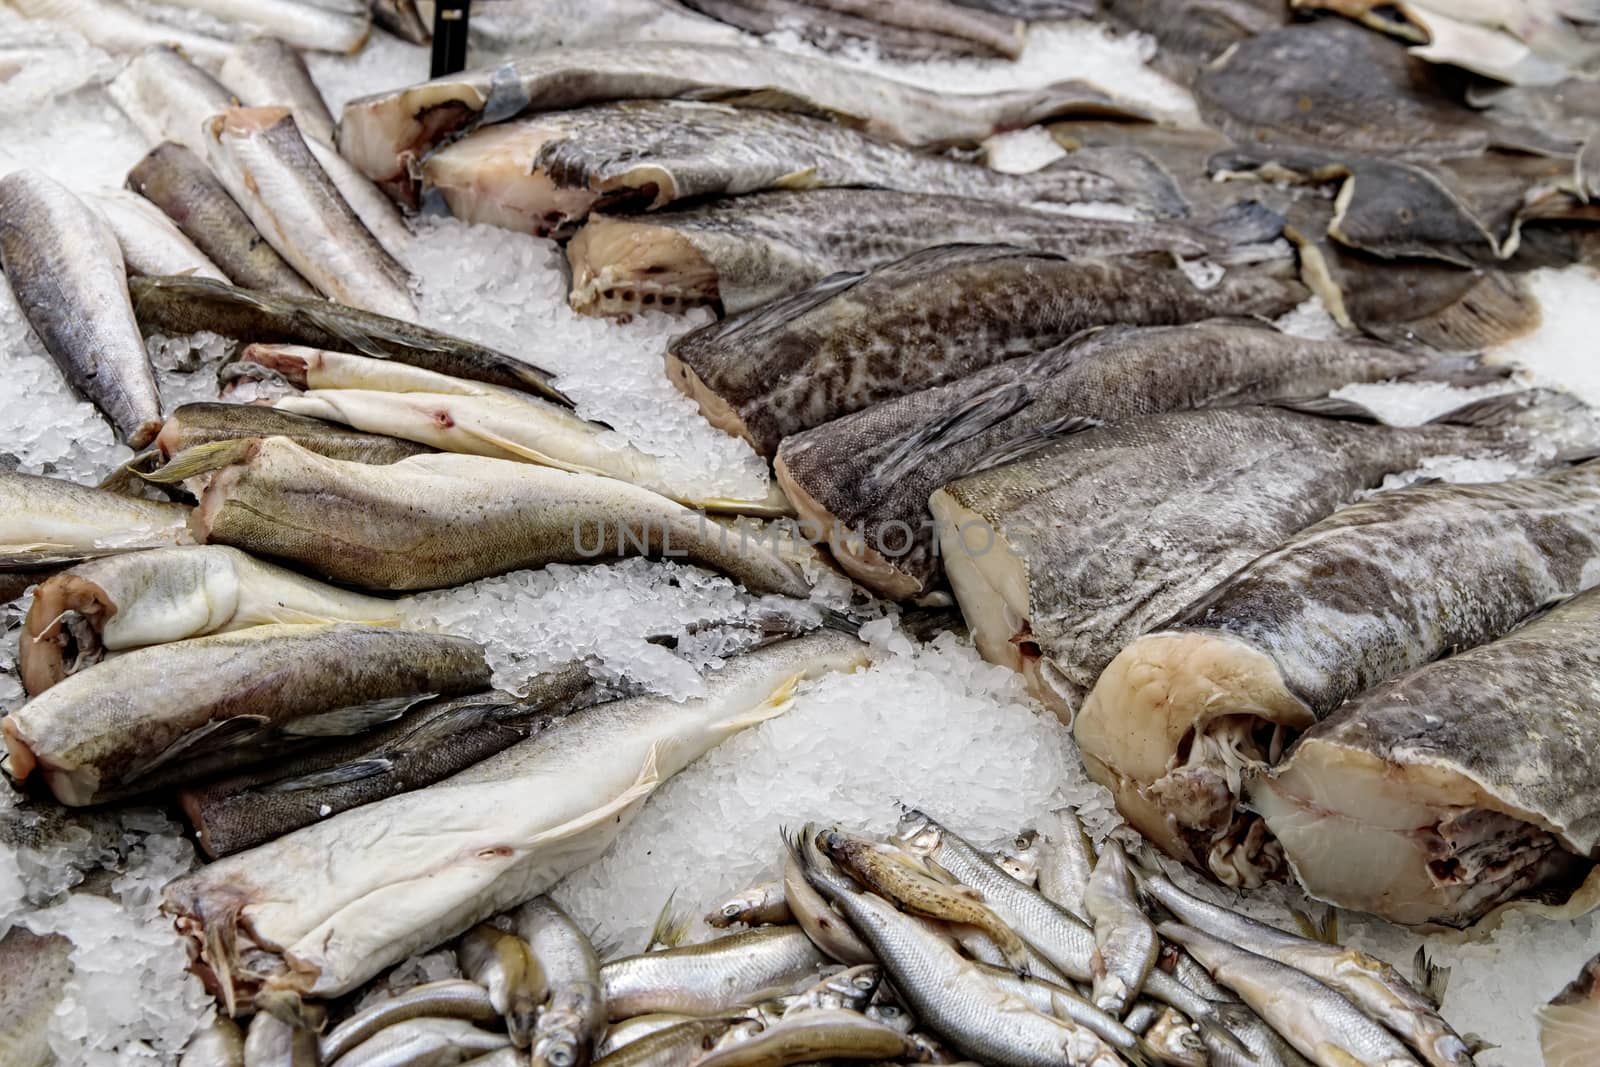 Fish exposed in fish market for sale to the consumer by bonilook